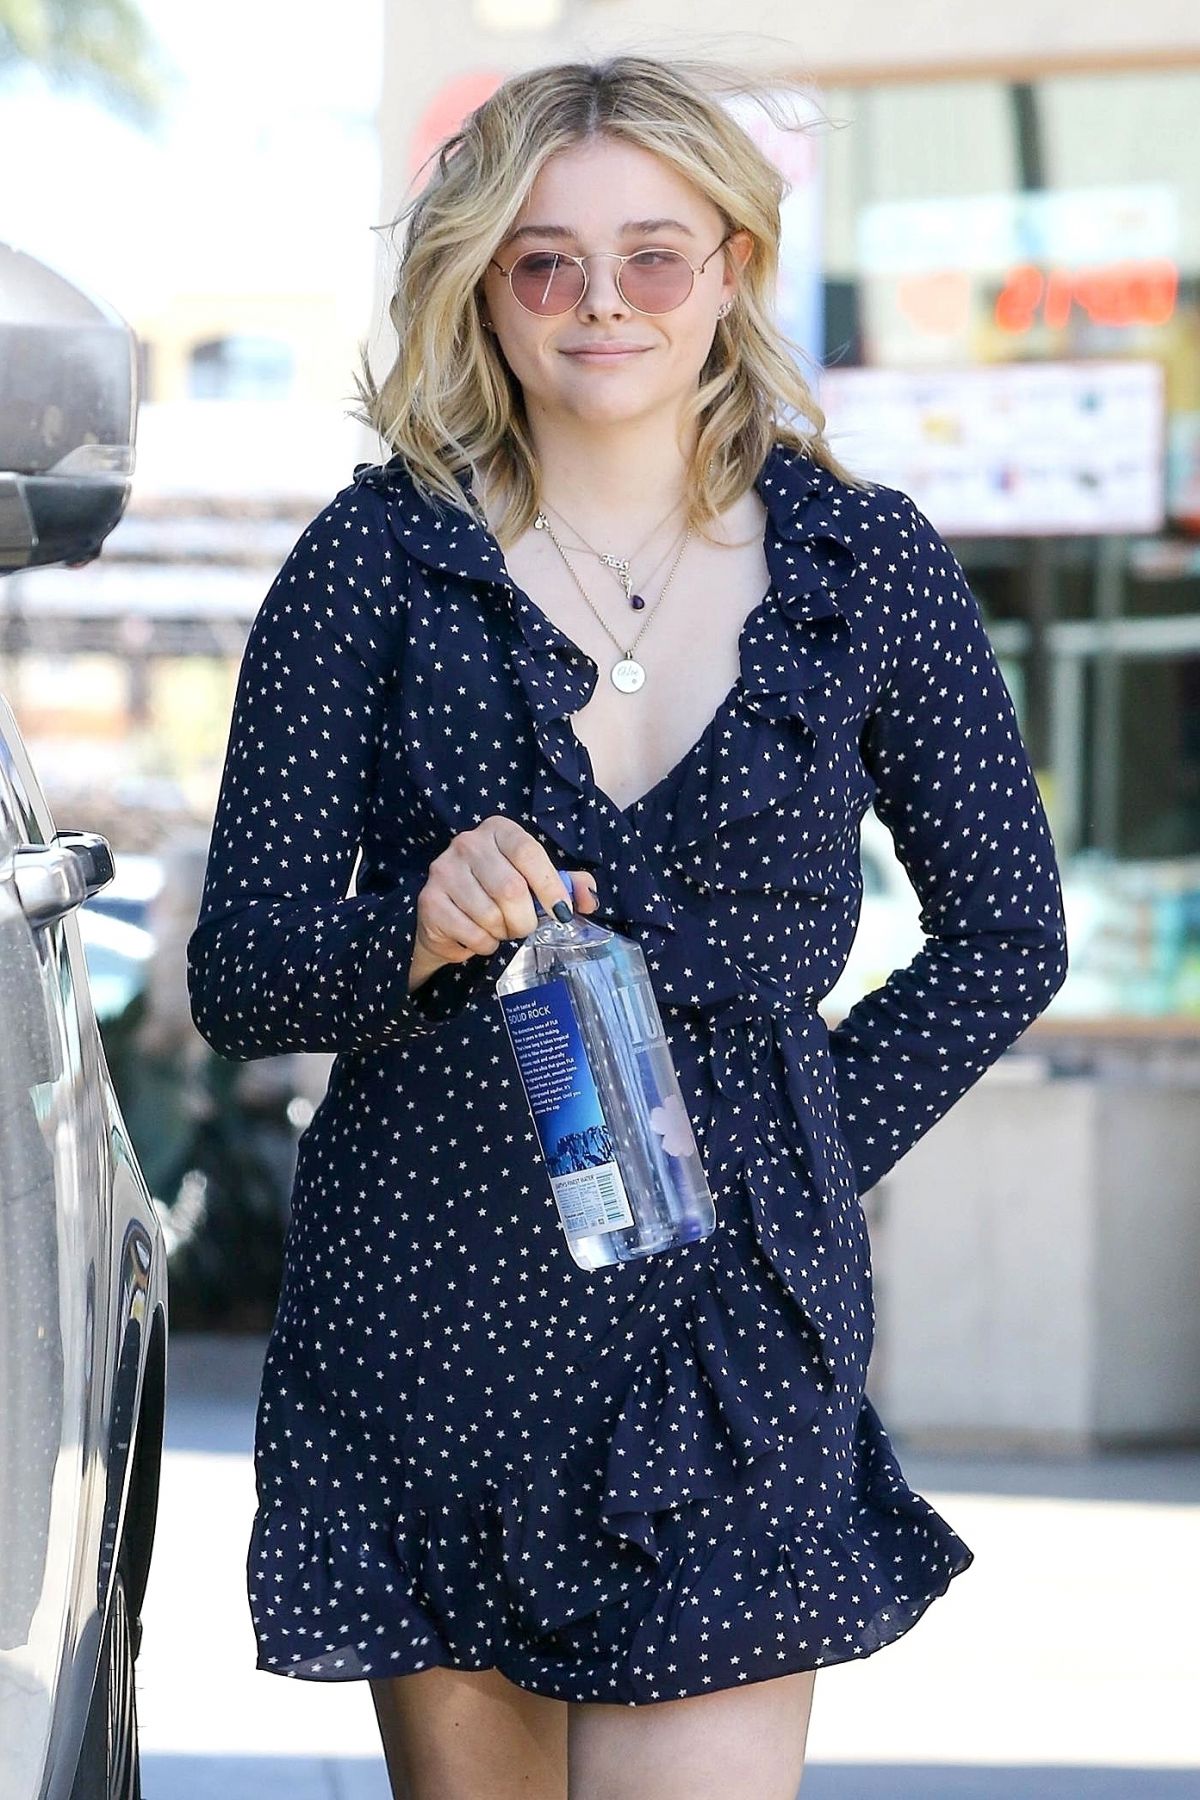 CHLOE MORETZ at a Gas Station in Los Angeles 03/26/2018 – HawtCelebs